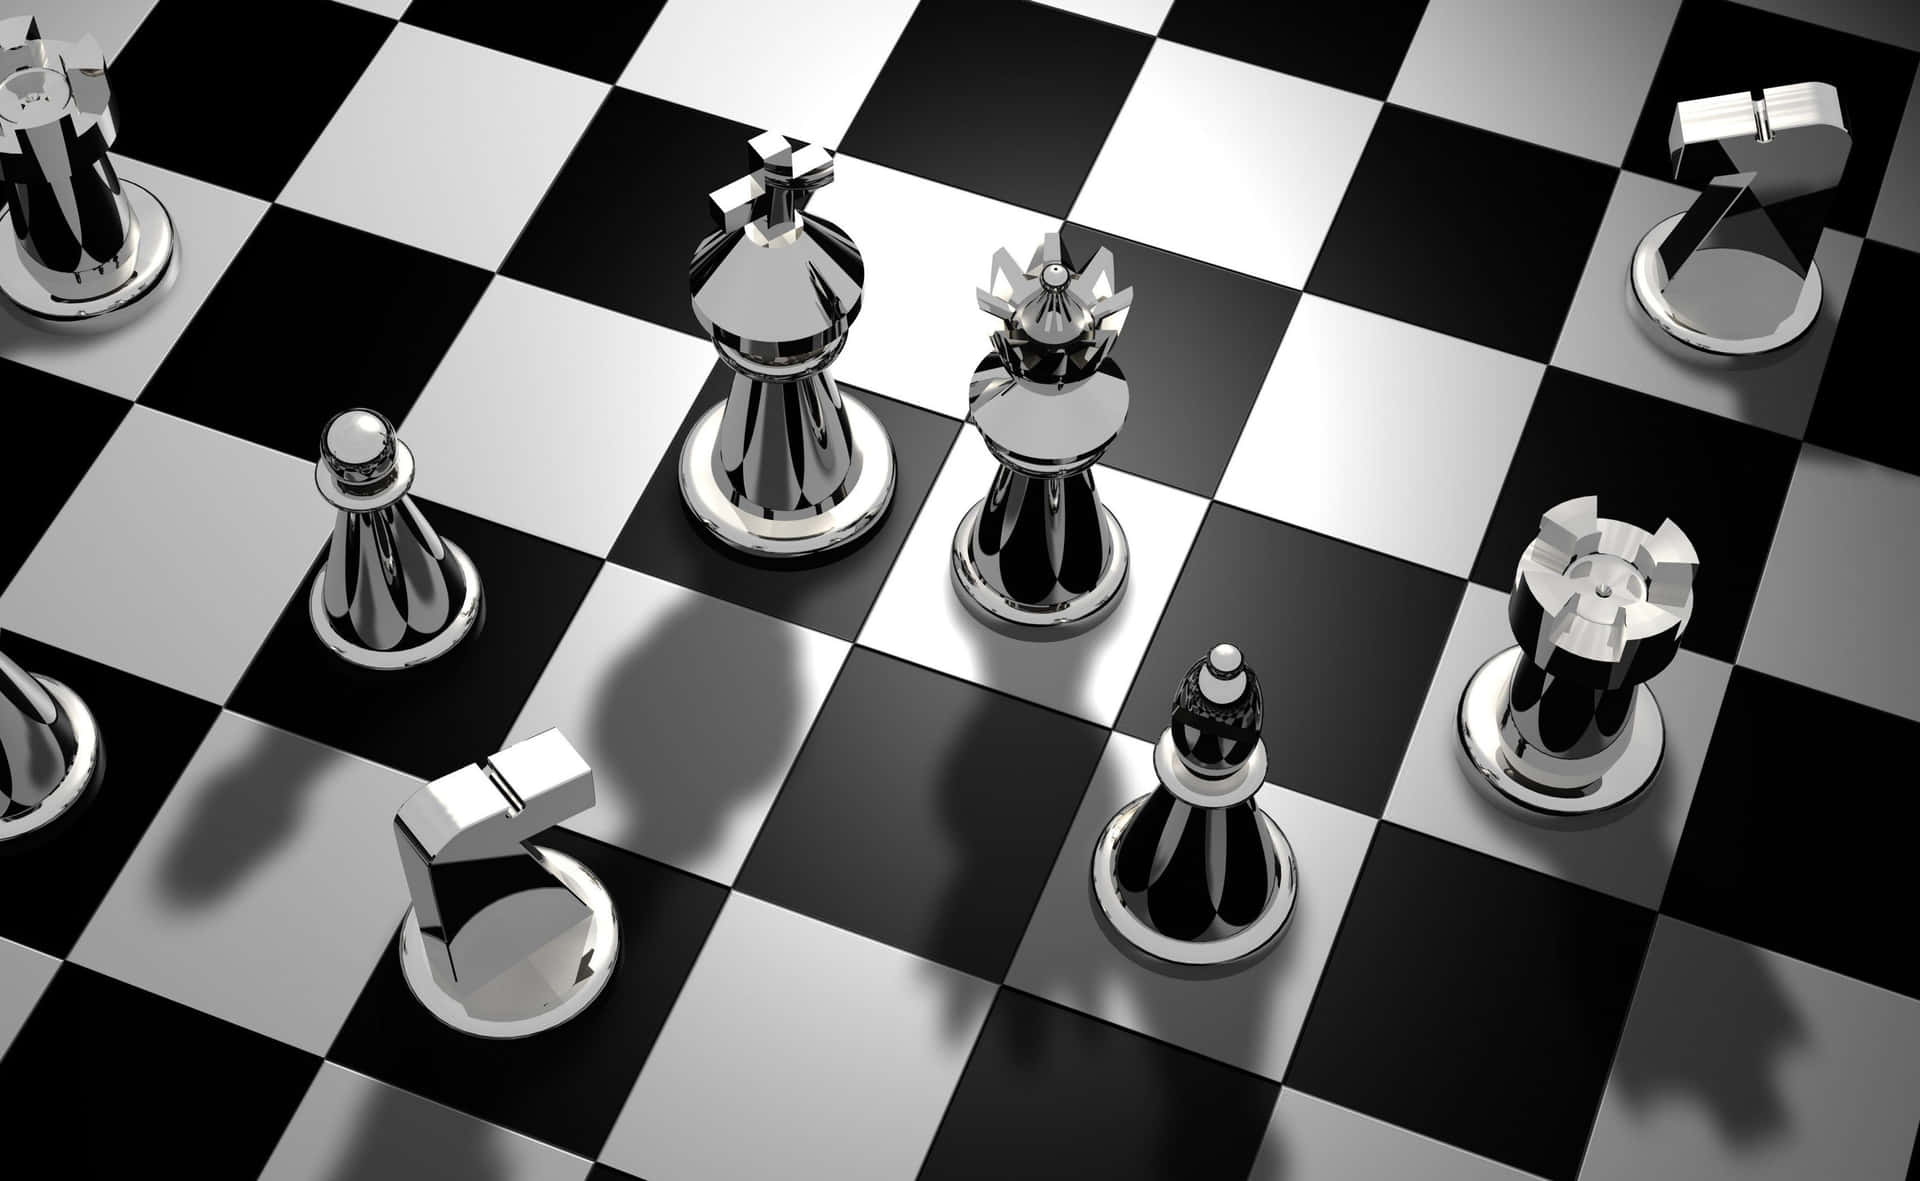 Chess Pieces On A Black And White Checkered Board